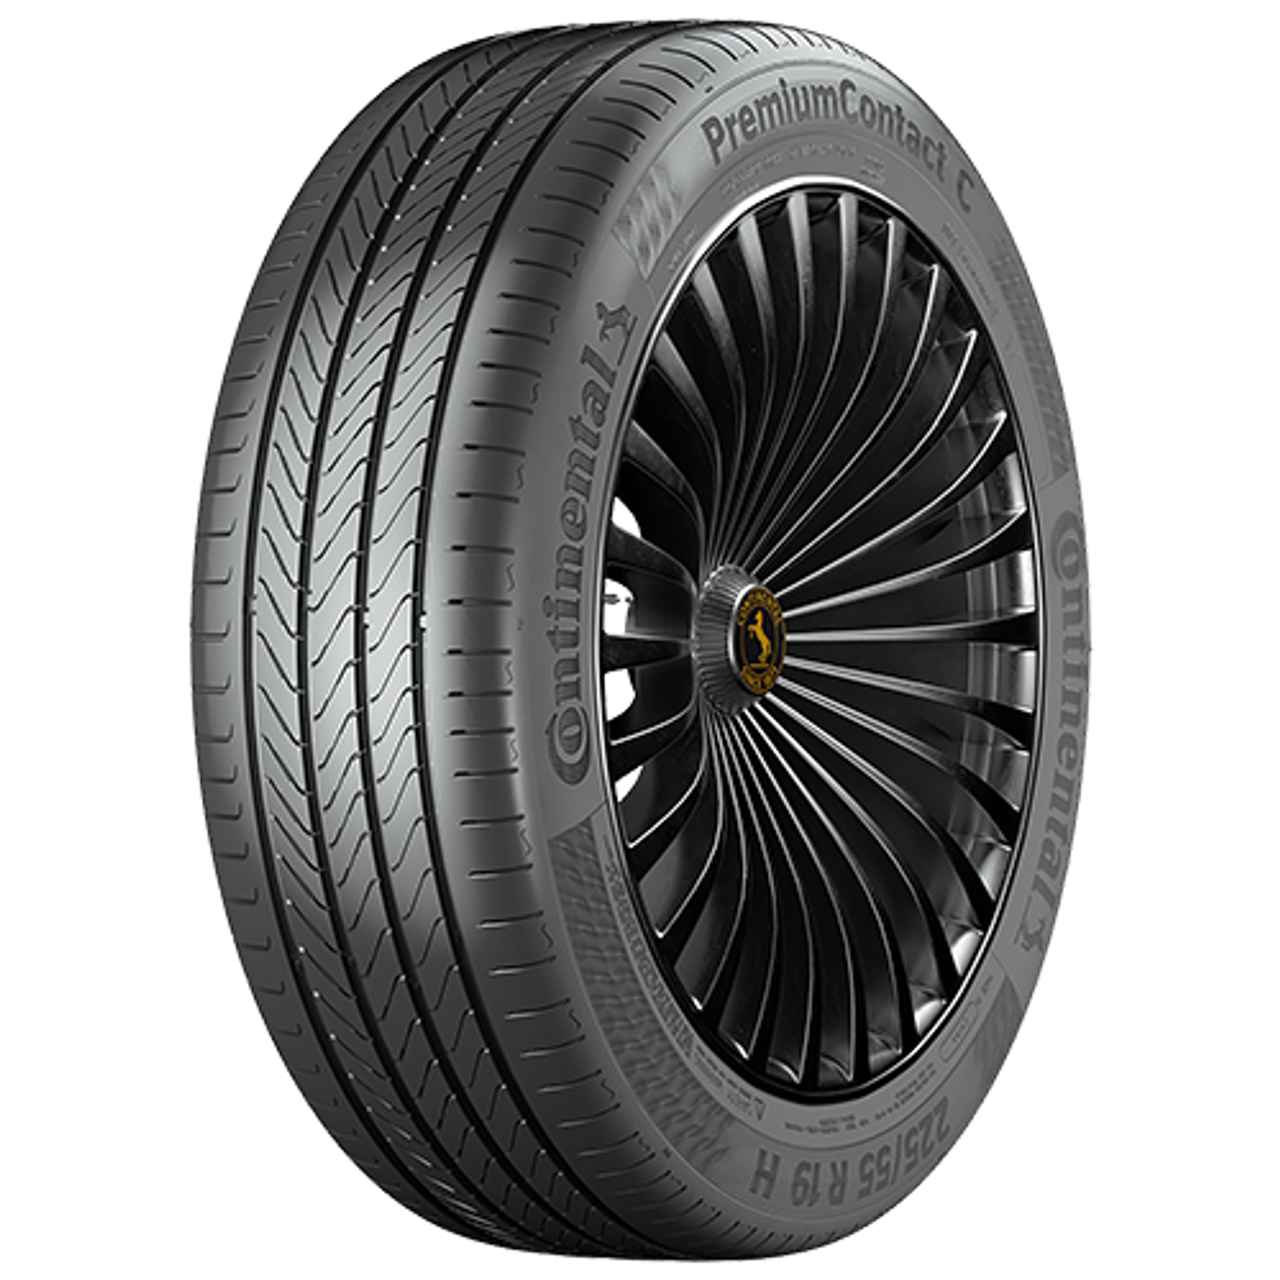 CONTINENTAL PREMIUMCONTACT C 235/50R20 104V BSW XL